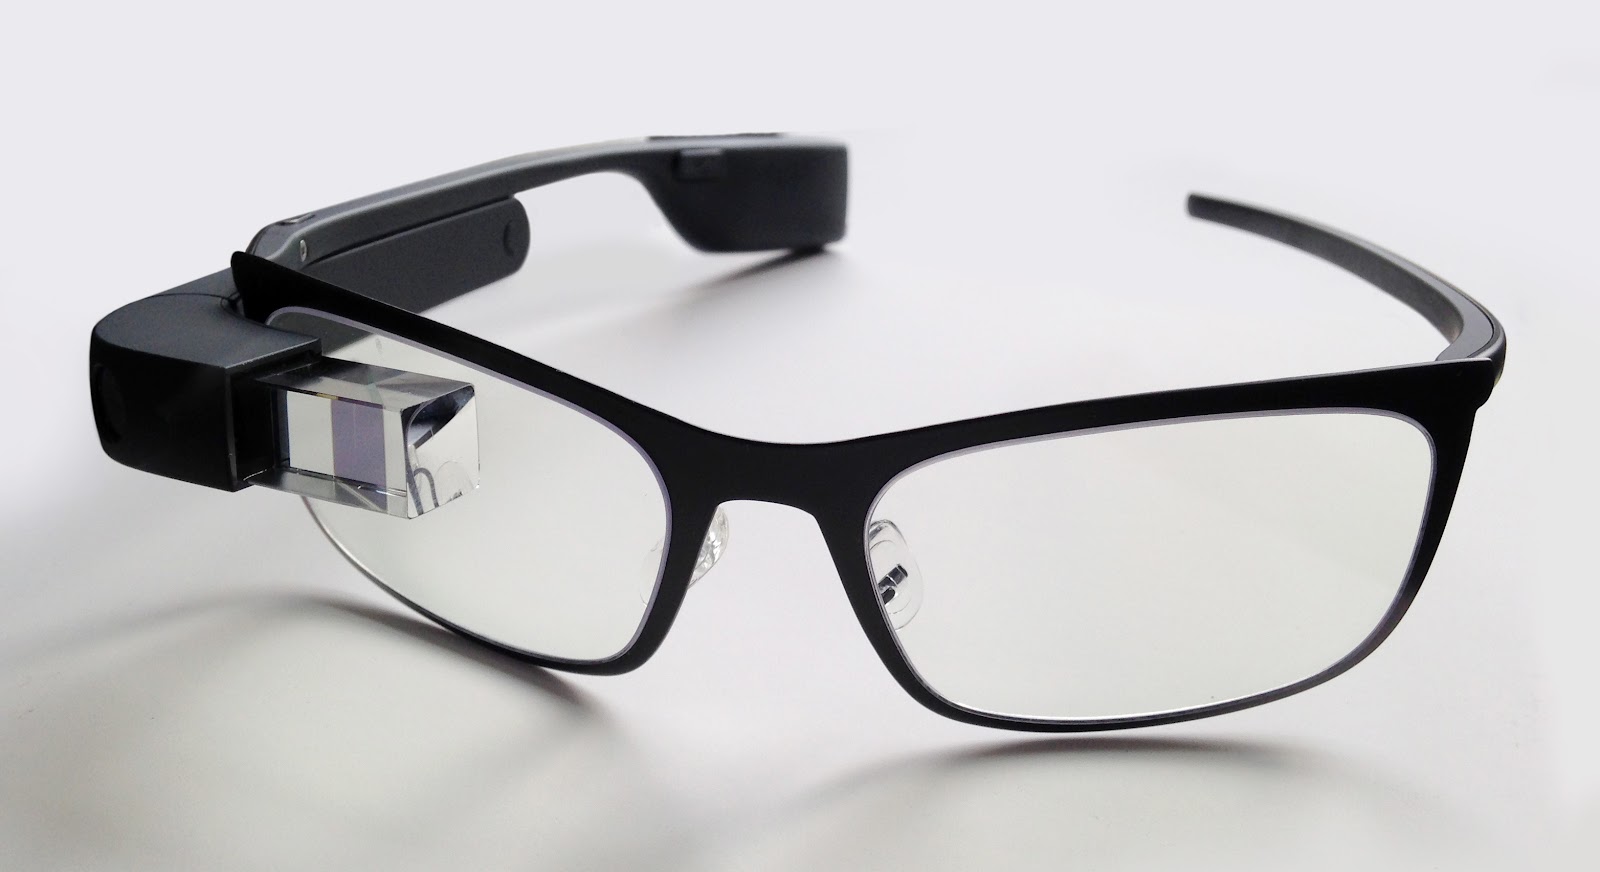 A Google Glass with black ...